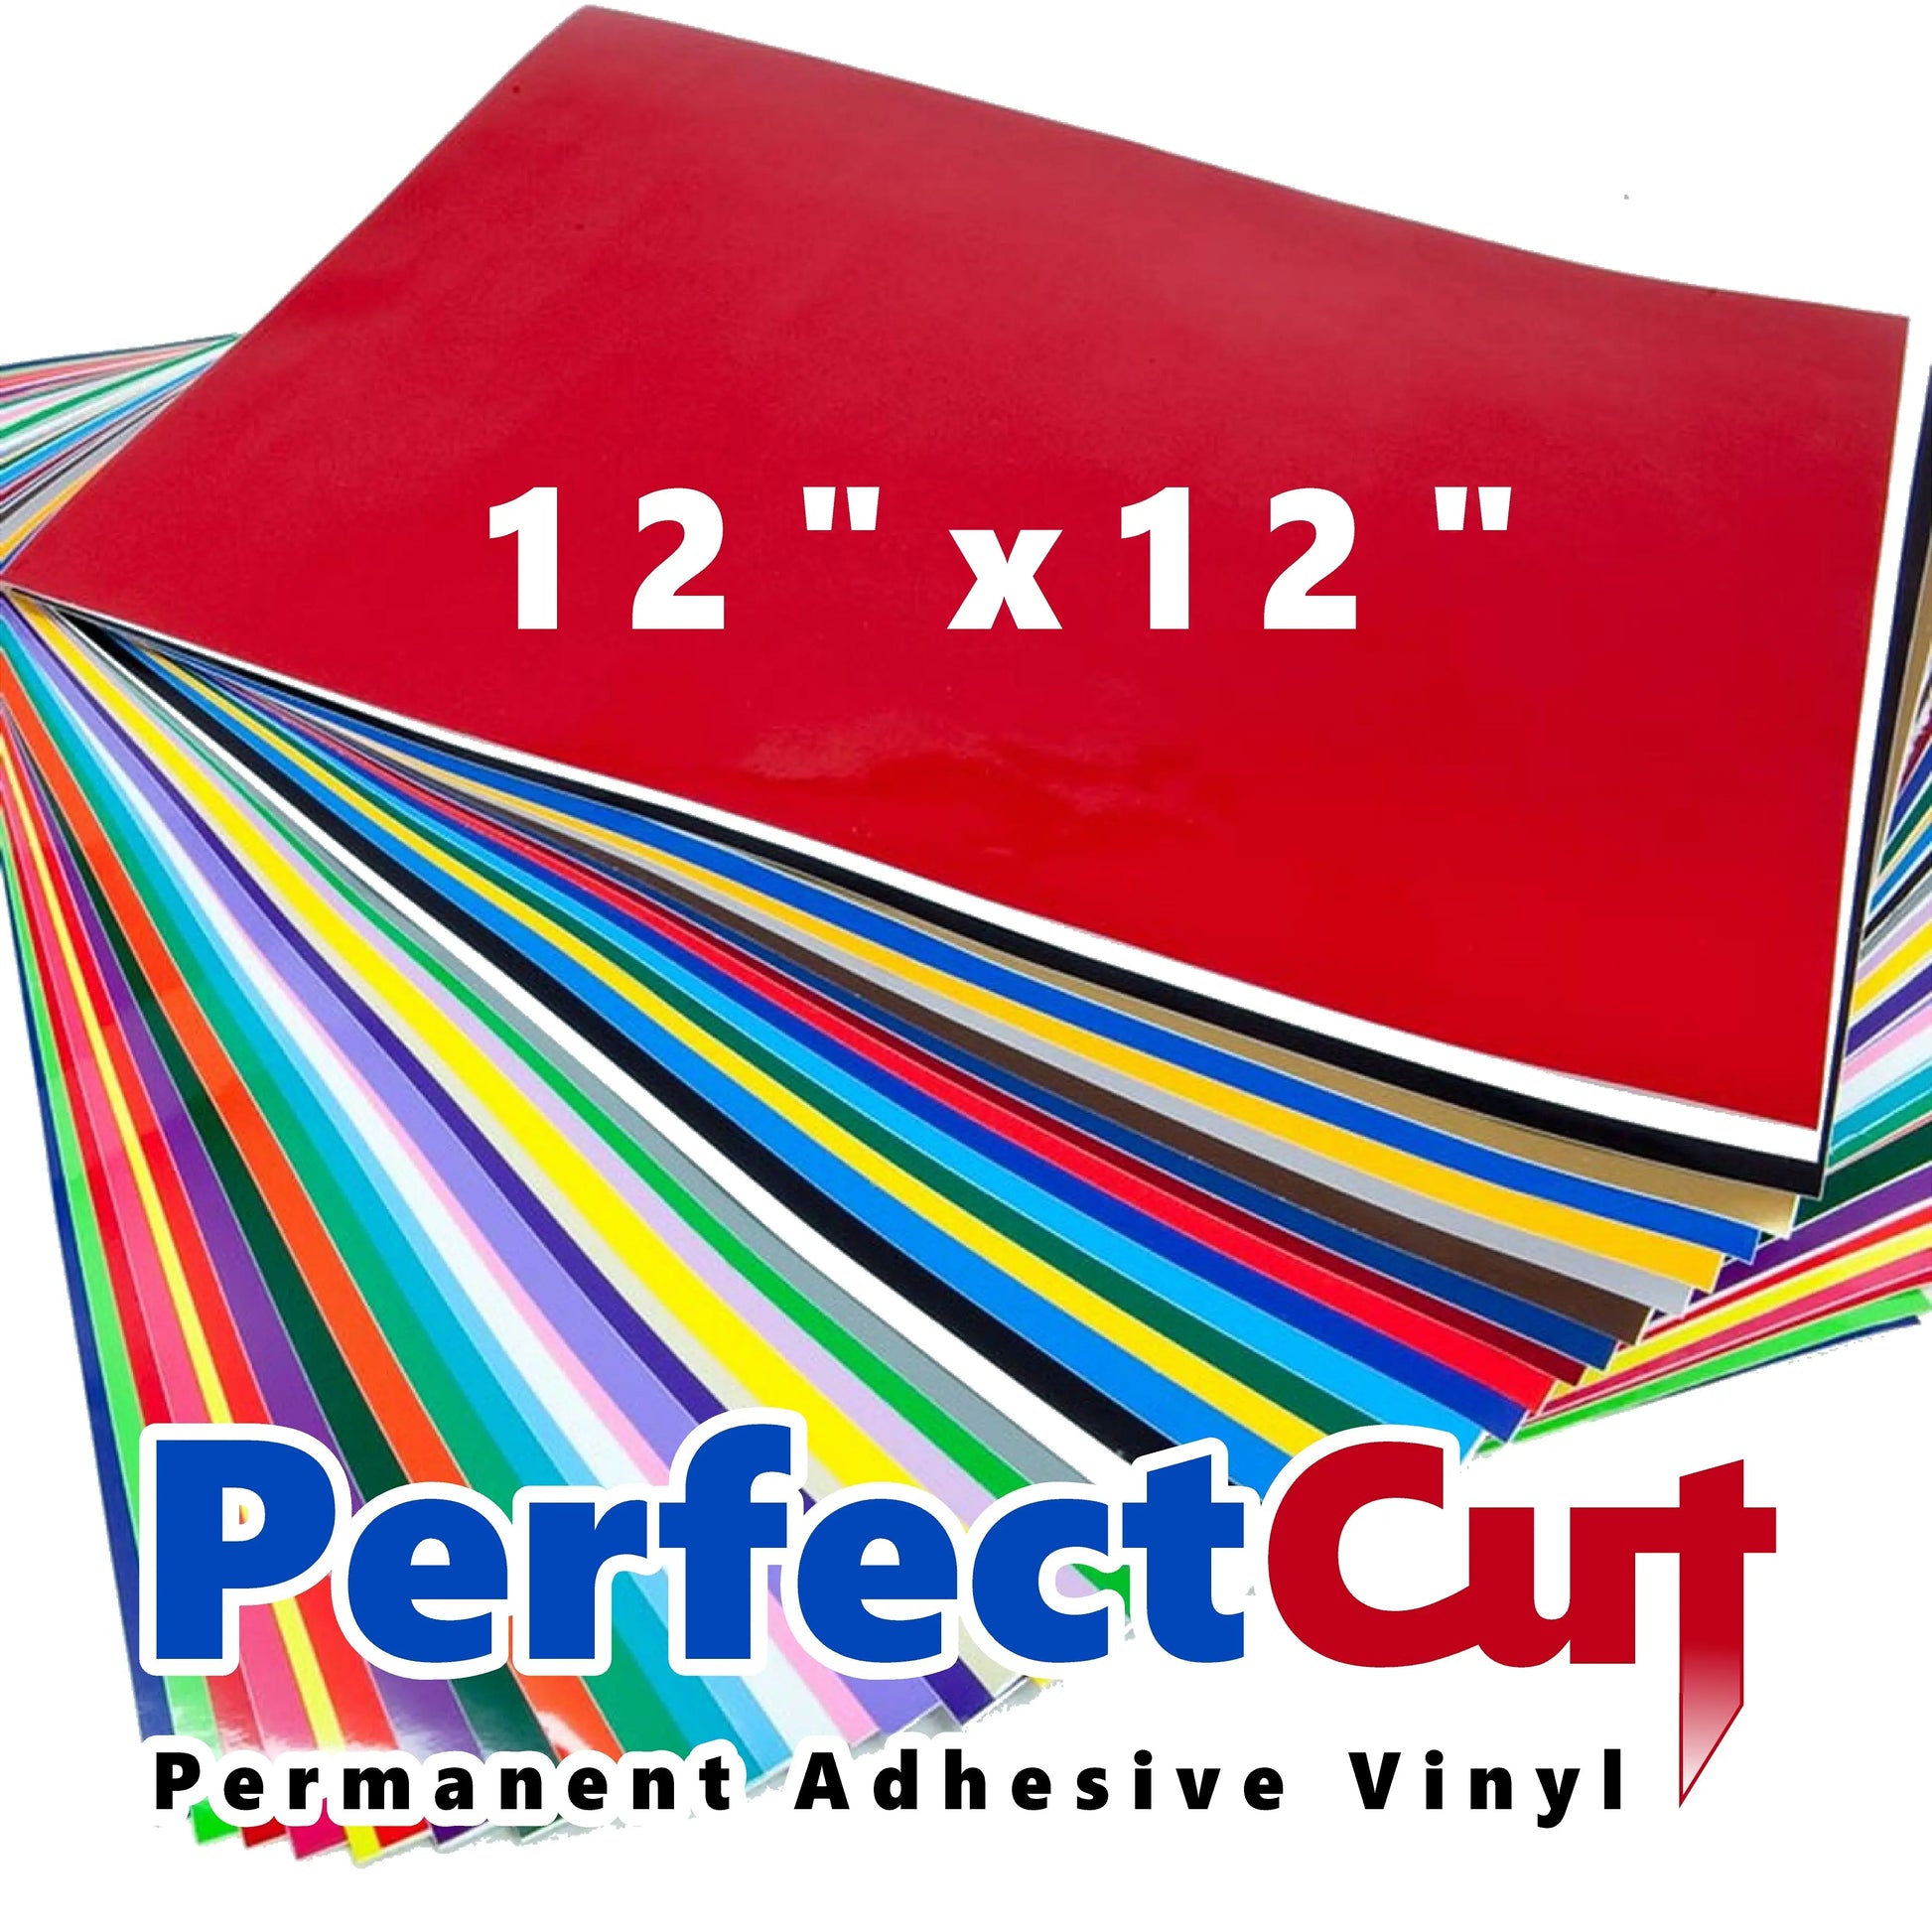 Permanent Adhesive Vinyl Craft Sheets 12' X 12' with Cricut and